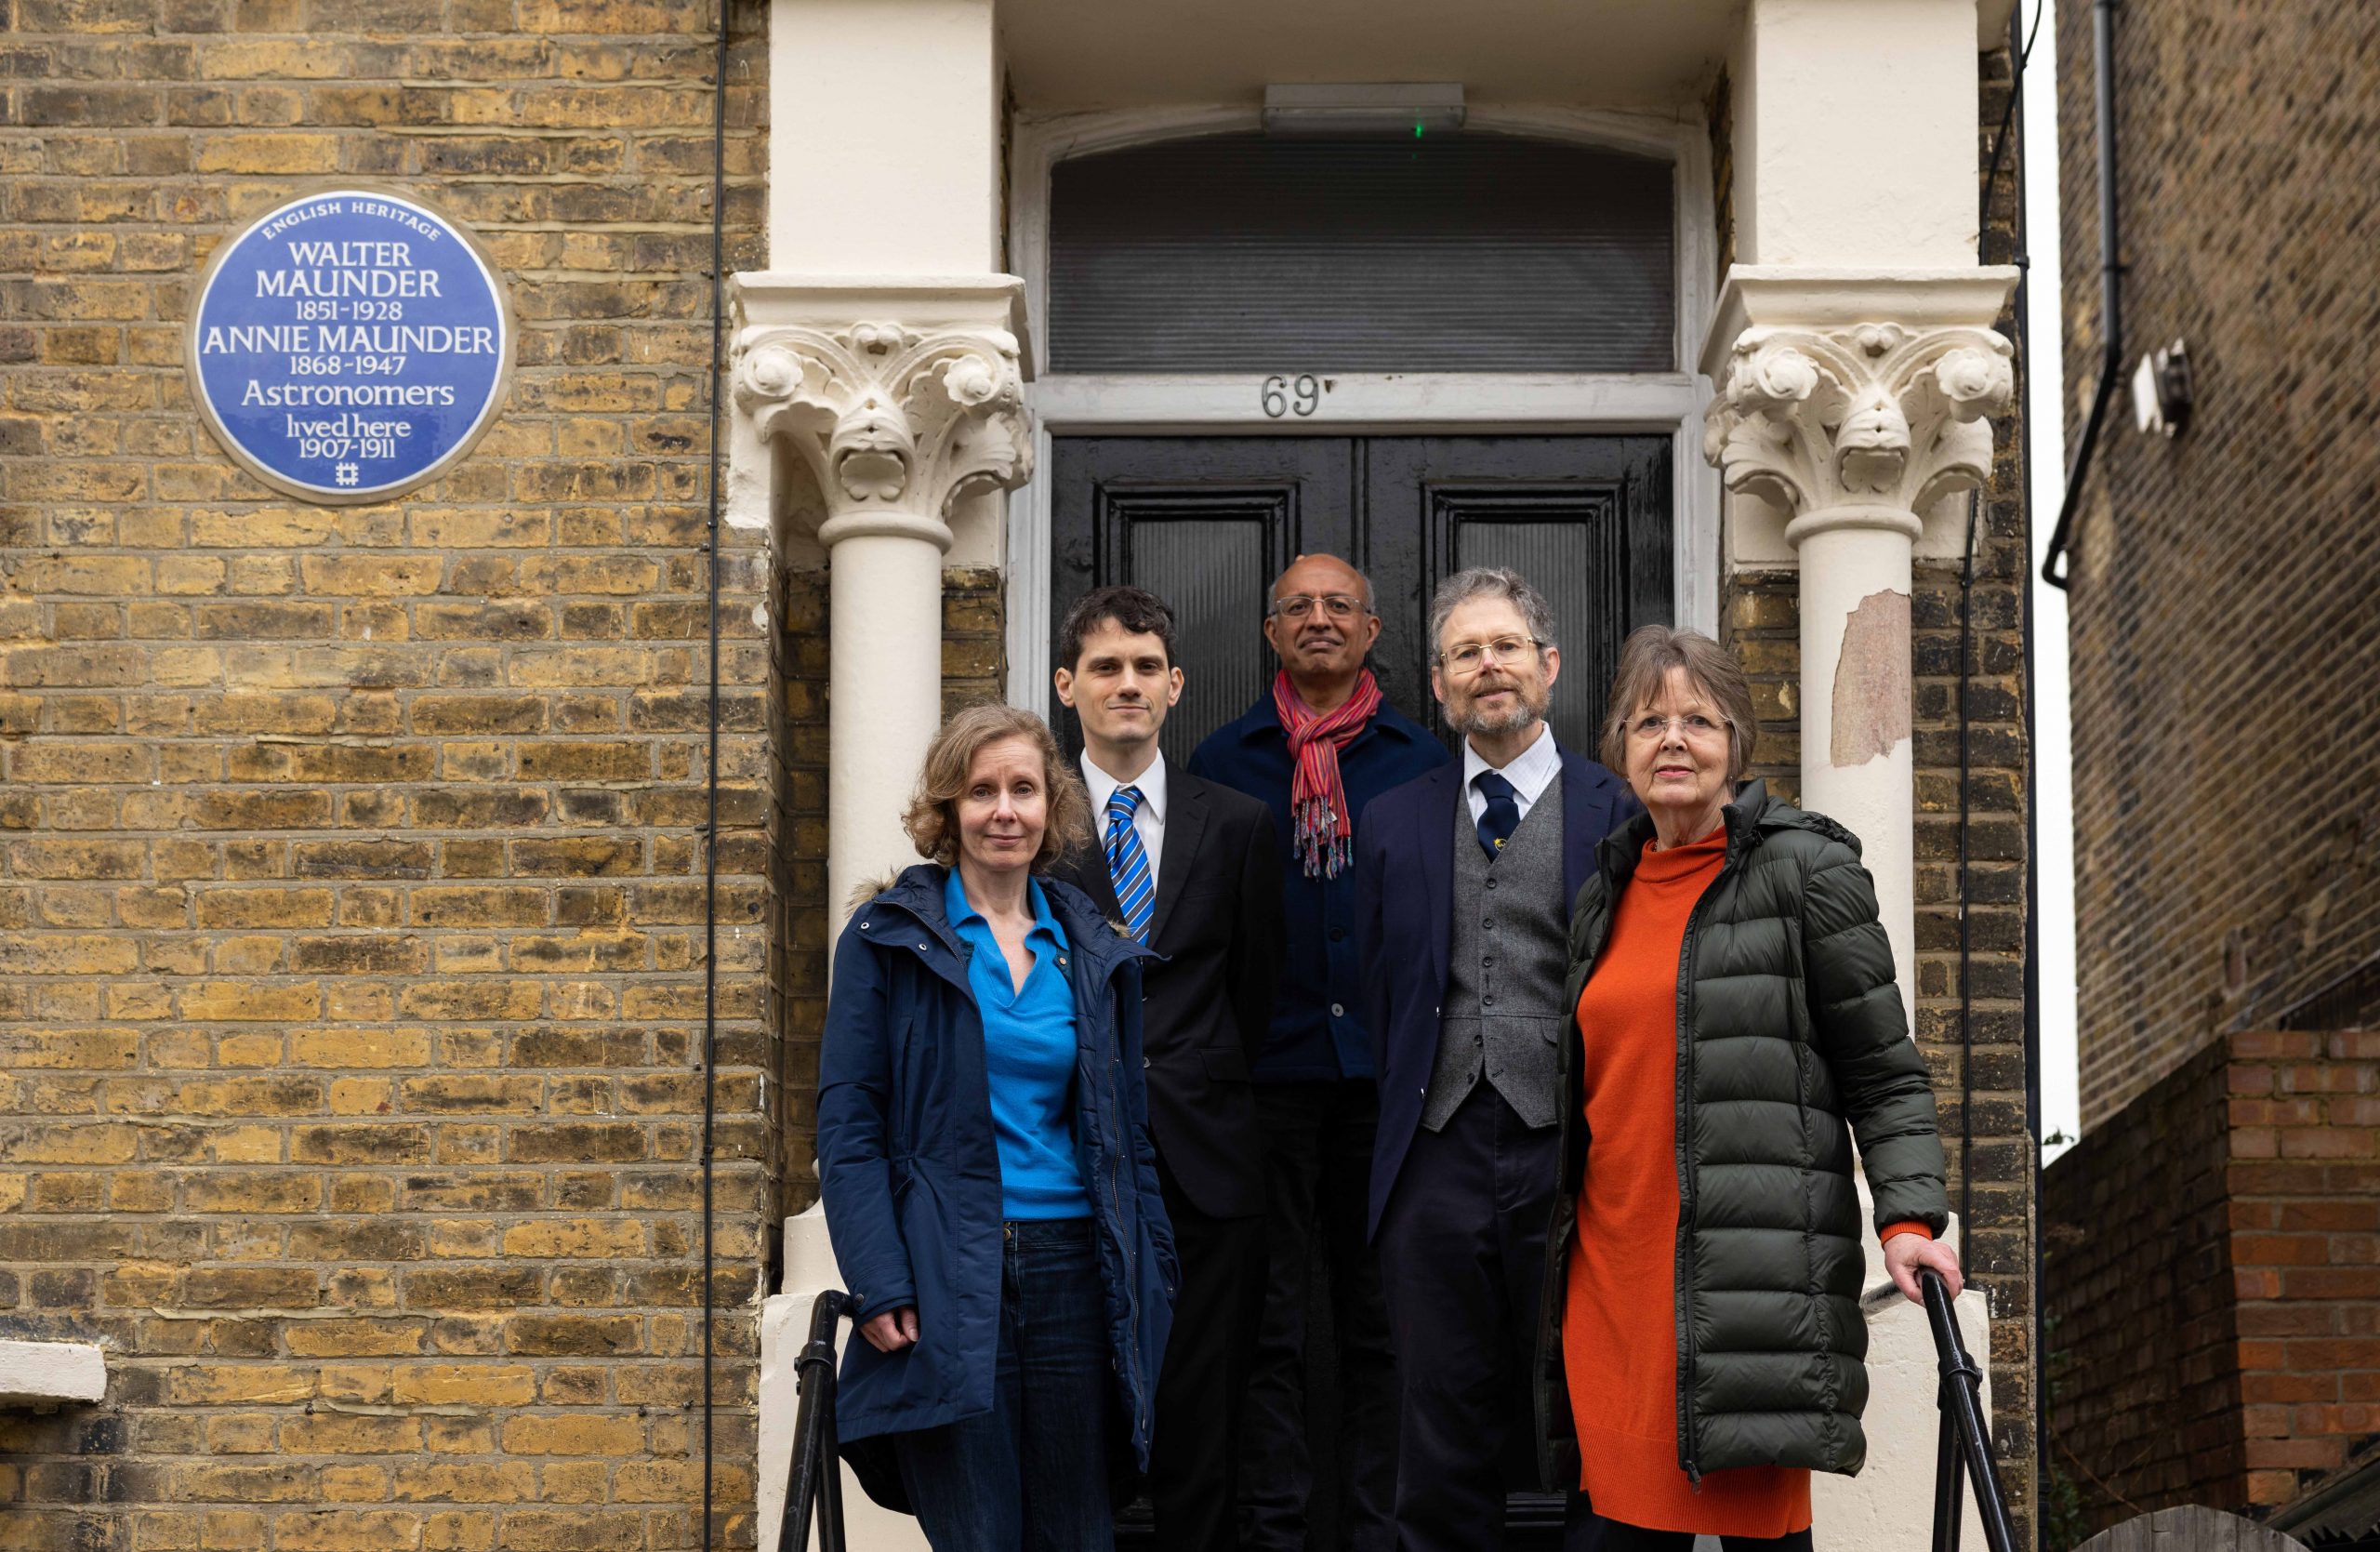 Prof Sarah Matthews, Dr Nicholas Heavens, Prof Sanjeev Gupta, Dr David Arditti and Dorrie Giles, with the plaque remembering Walter and Annie Maunder.